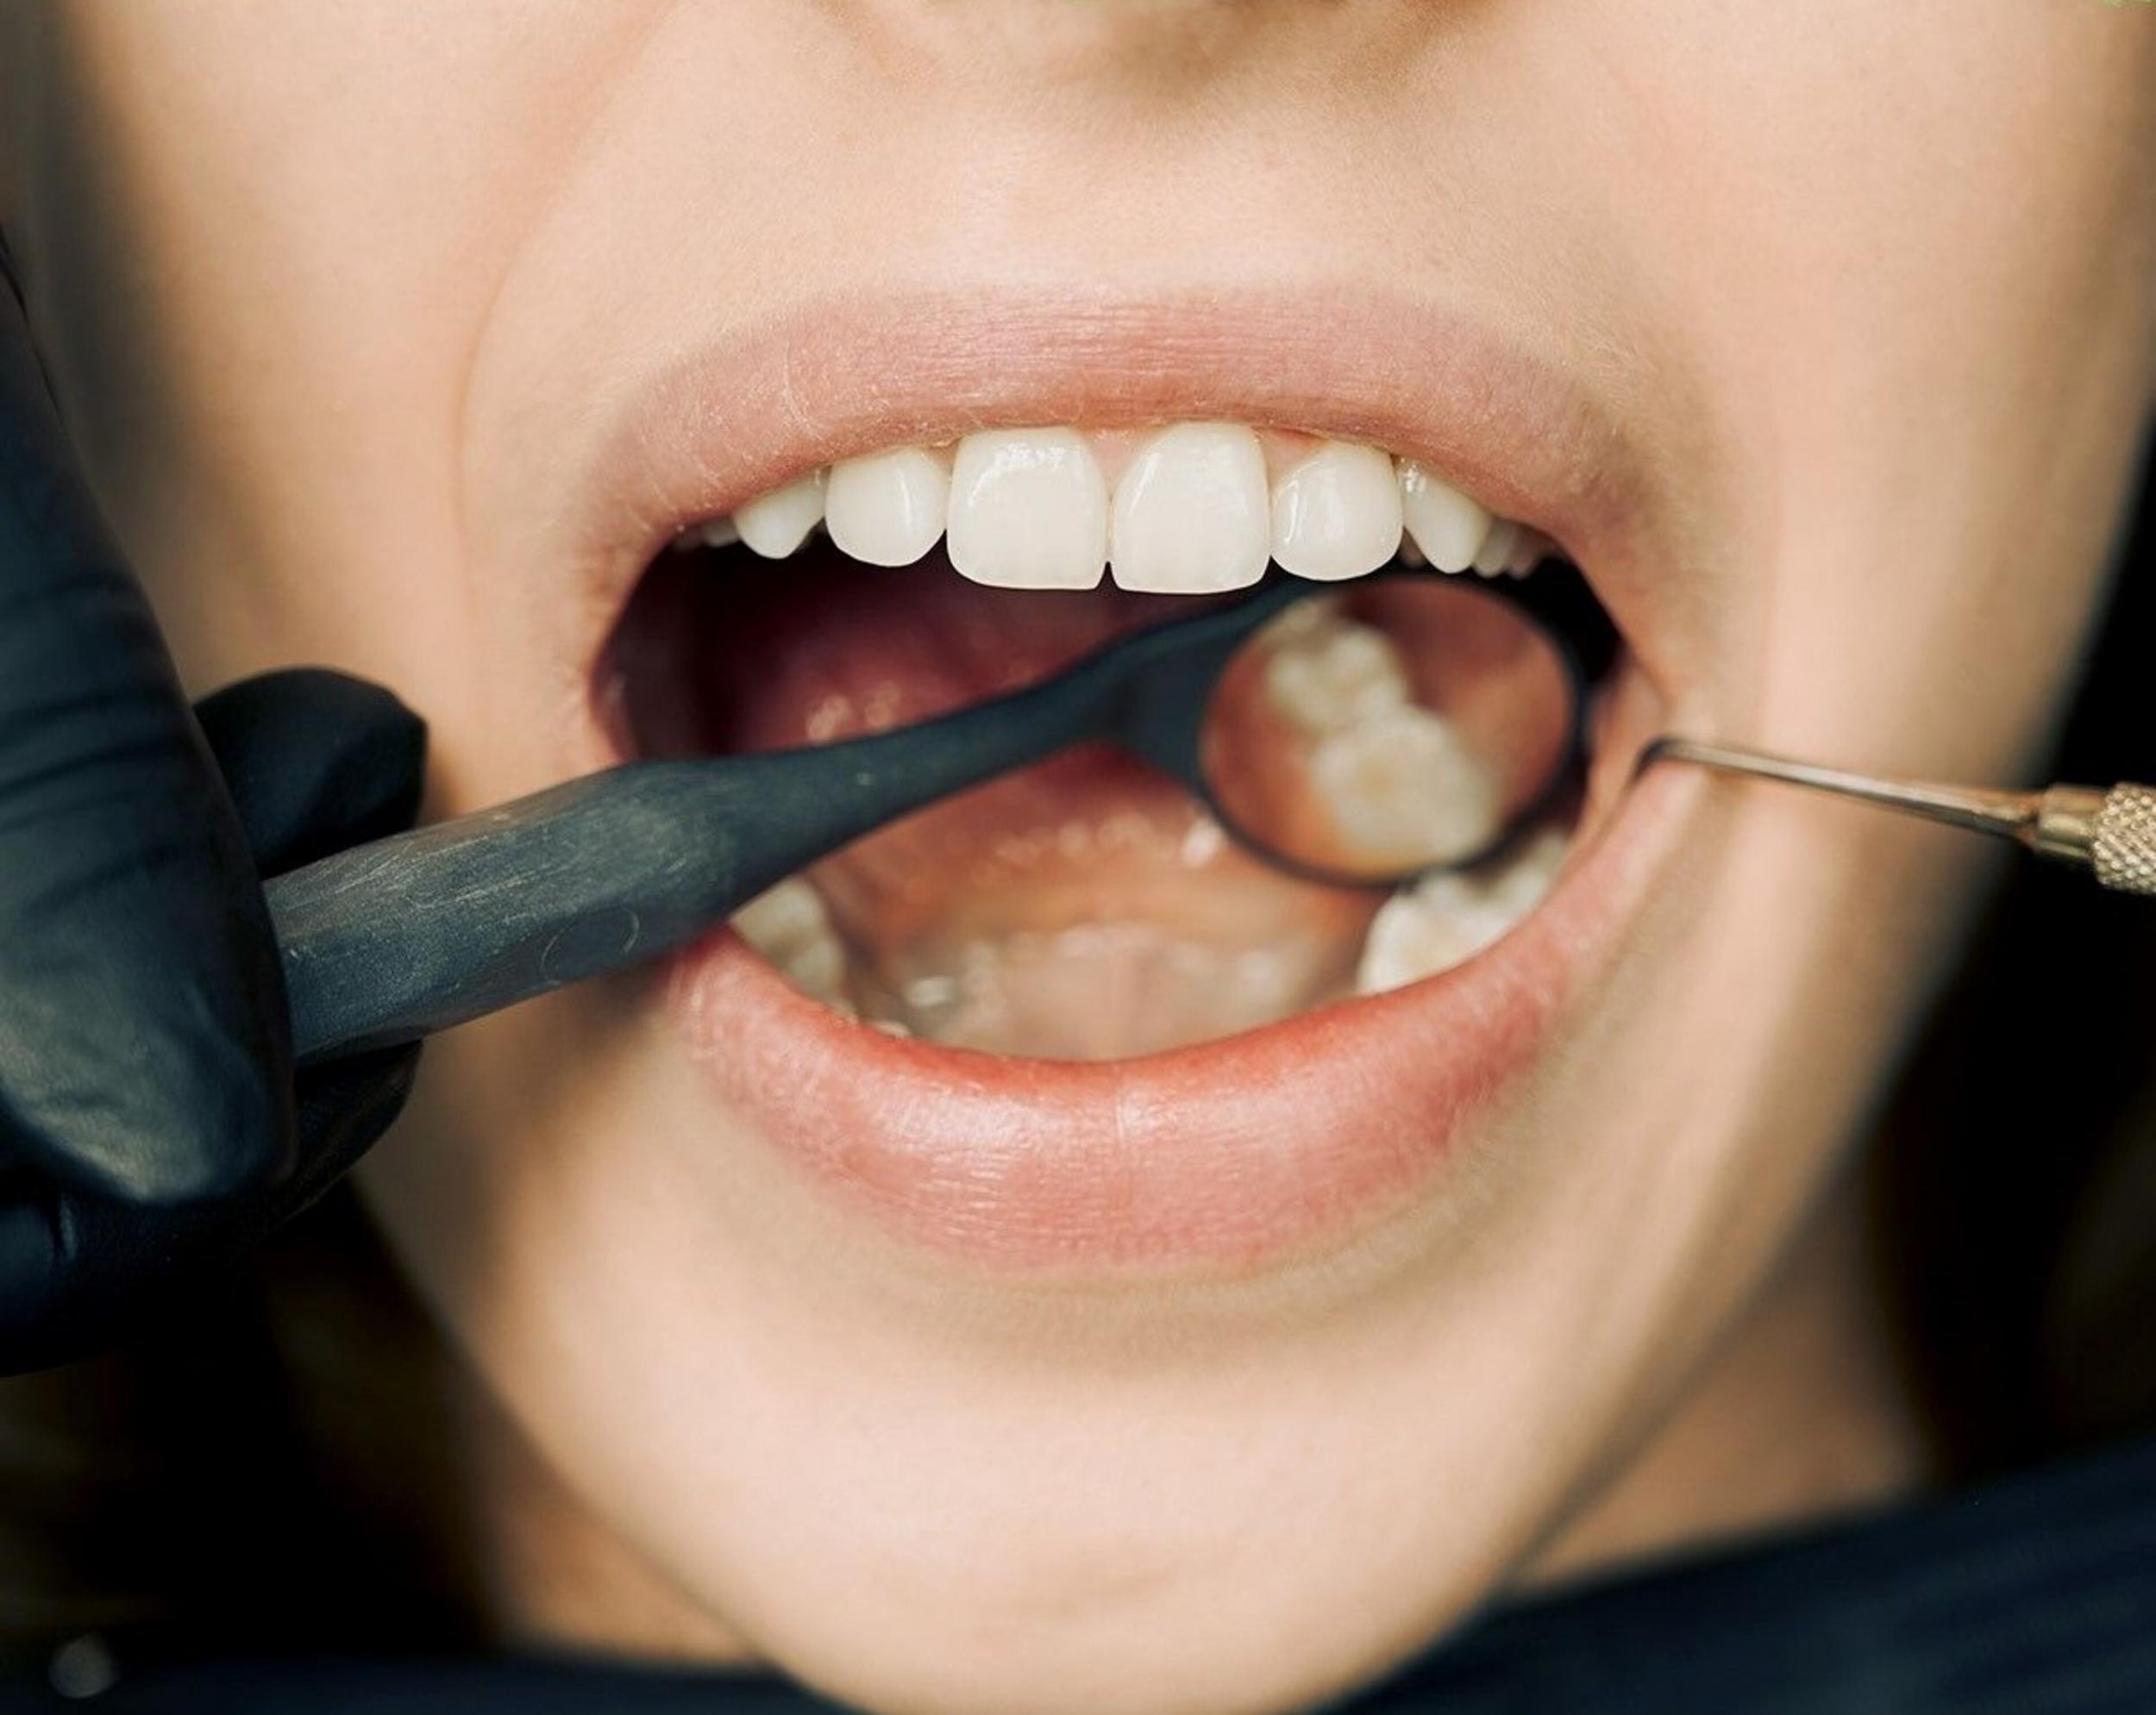 Akron Cosmetic Dentist Can Whiten Your Severely Discolored Teeth In One Visit